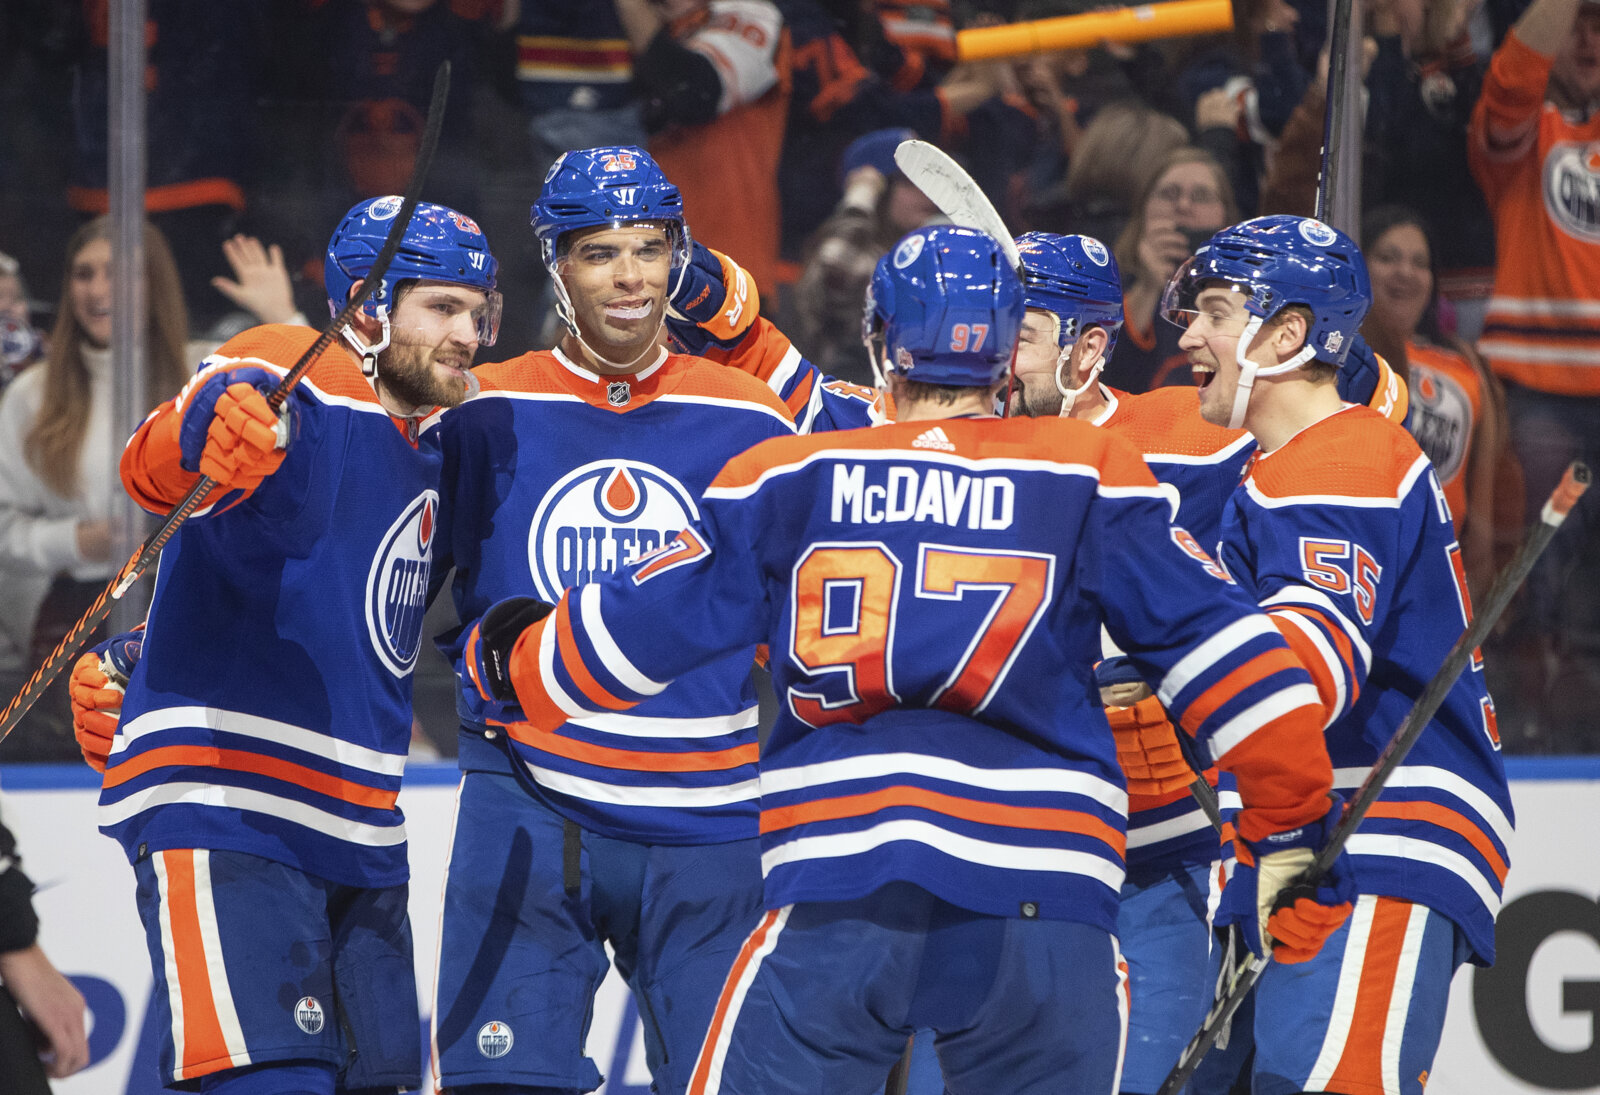 1189652 Panthers Oilers Hockey 03126 1600x1095 